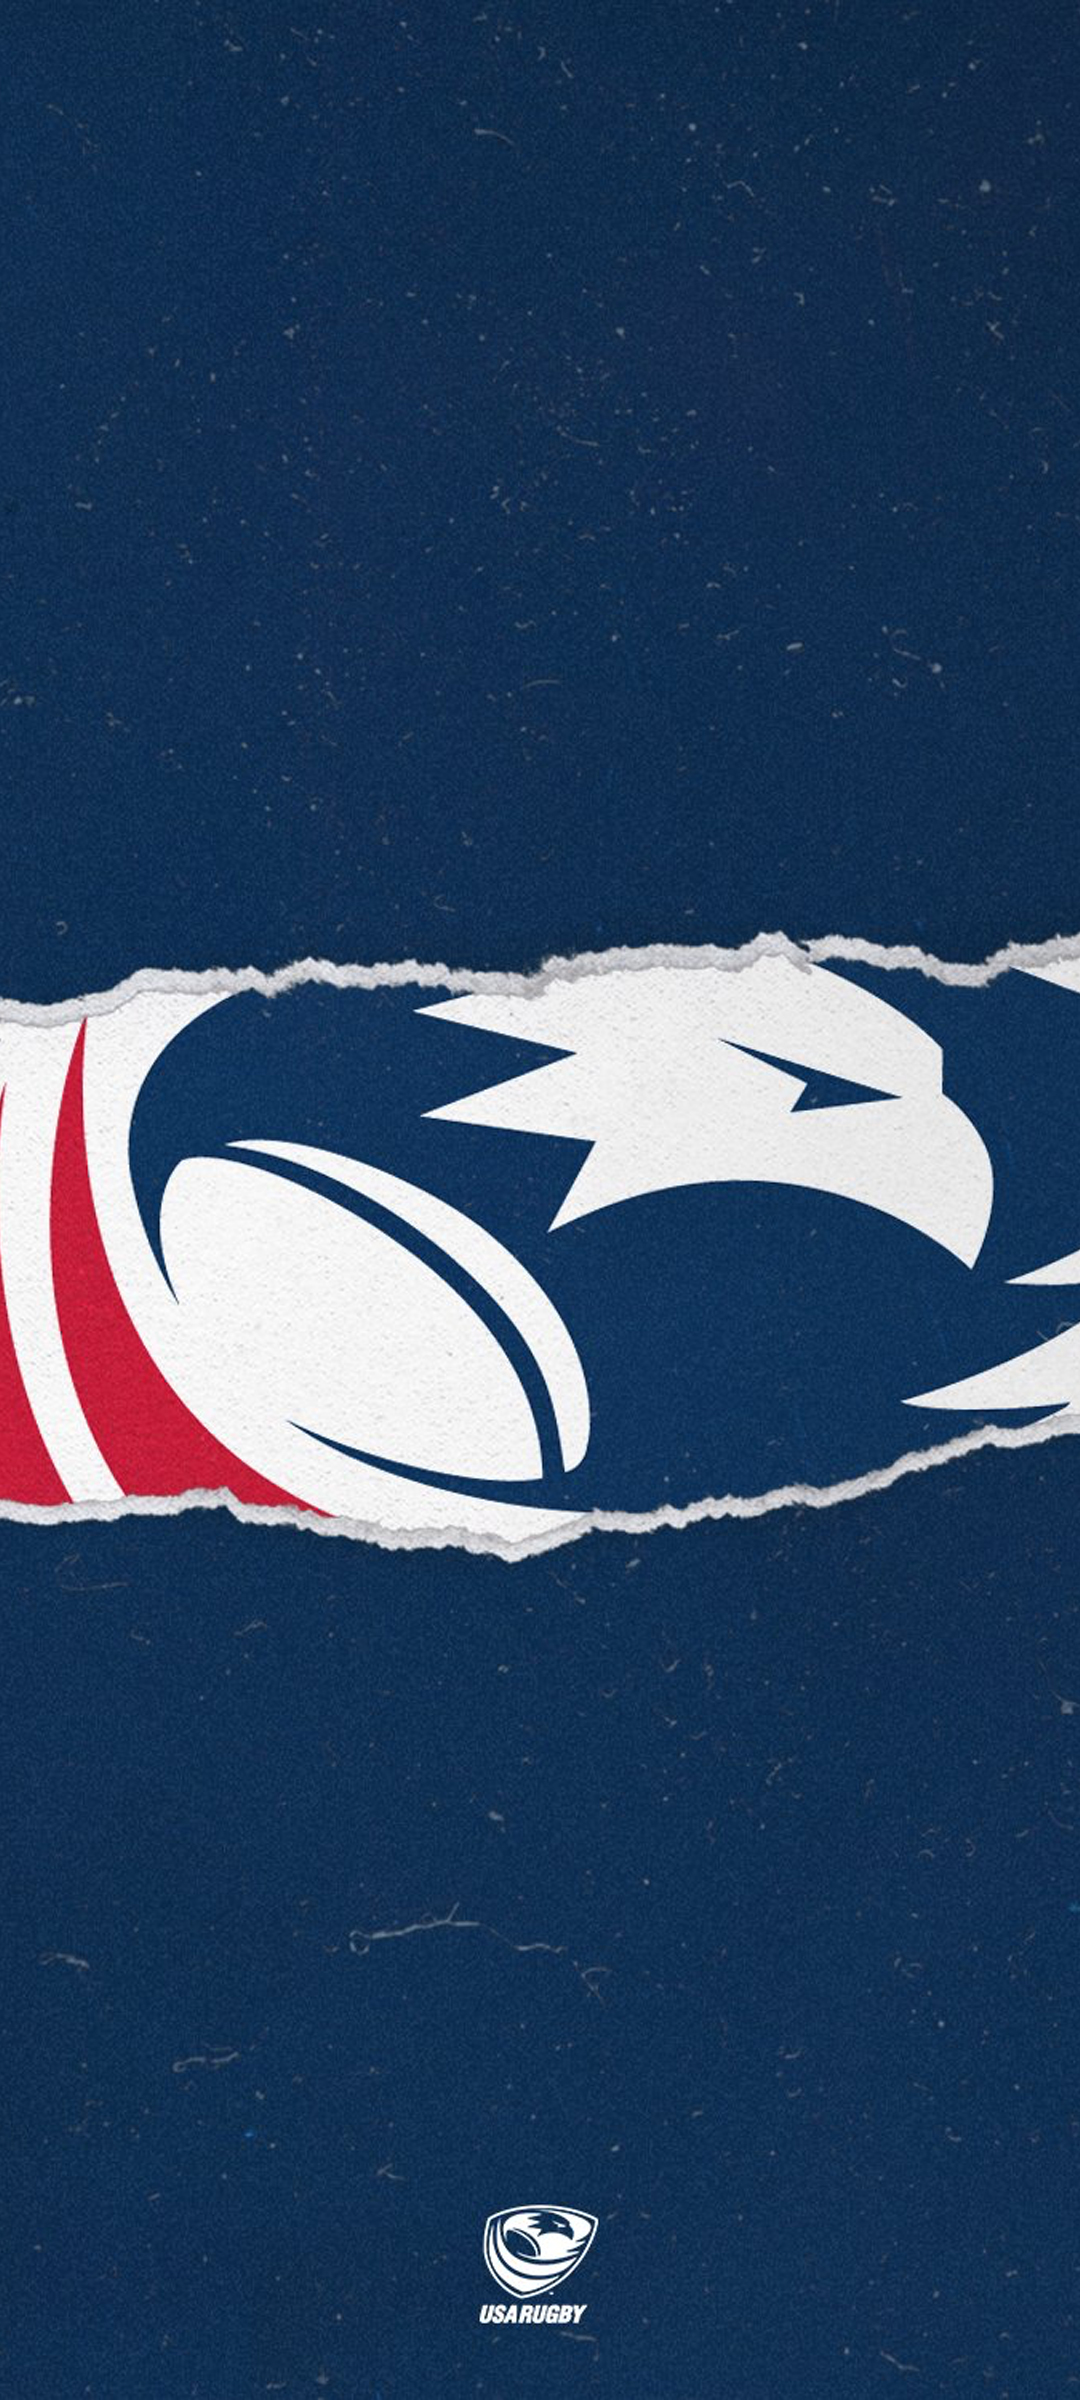 Usa Rugby Wallpapers